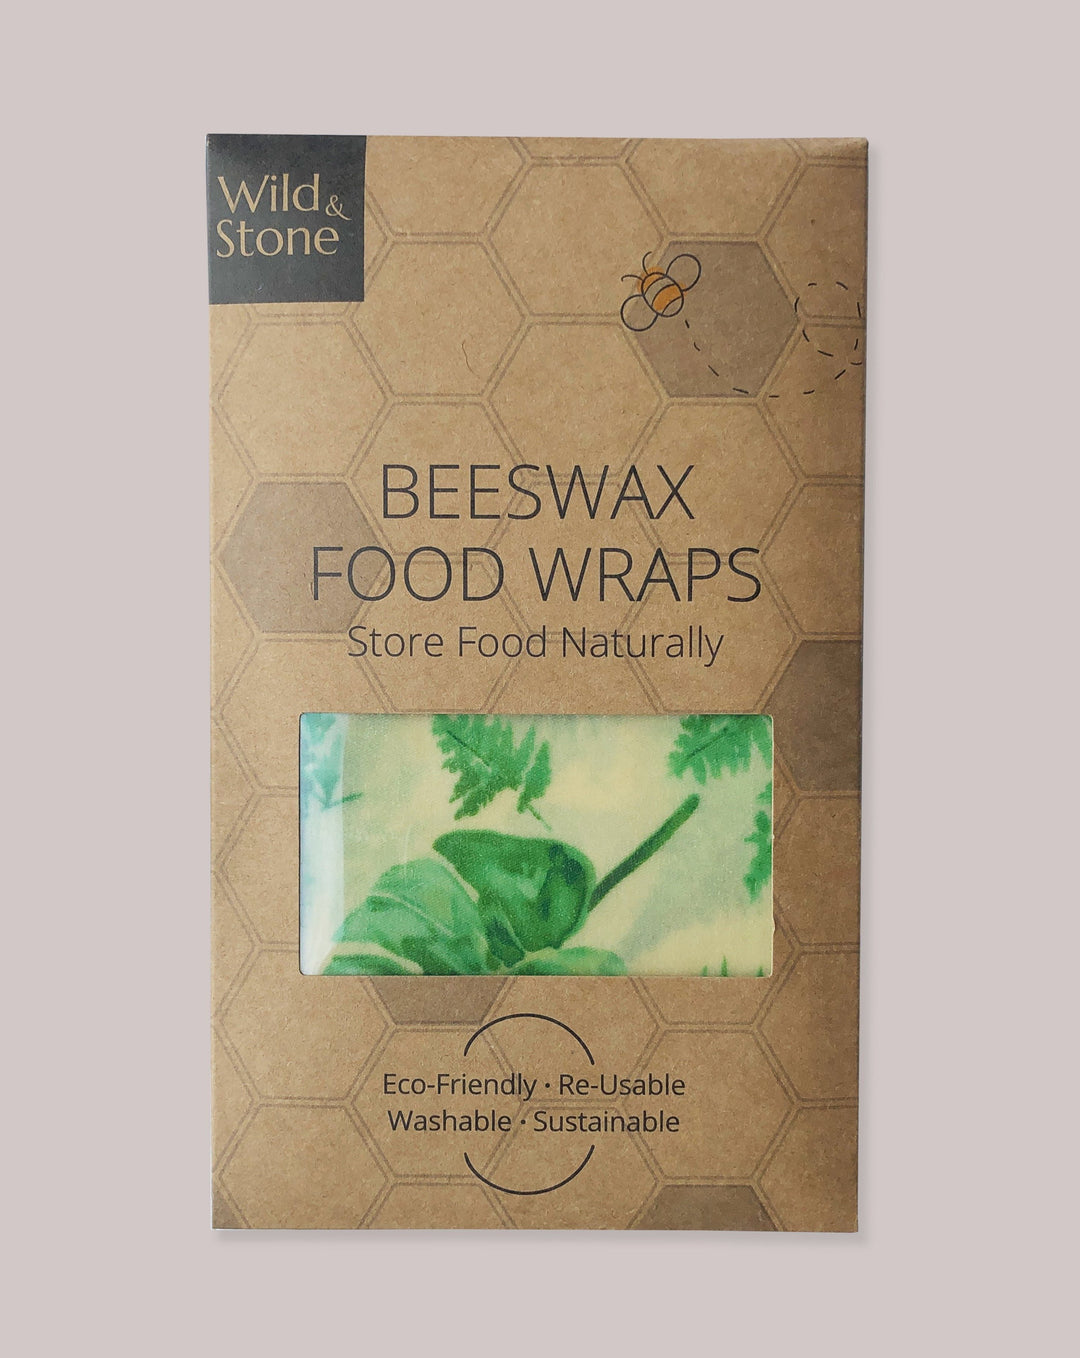 WILD AND STONE FOOD WRAPS Bees Wax Food Wraps - Pack of 3. Botanical Print.